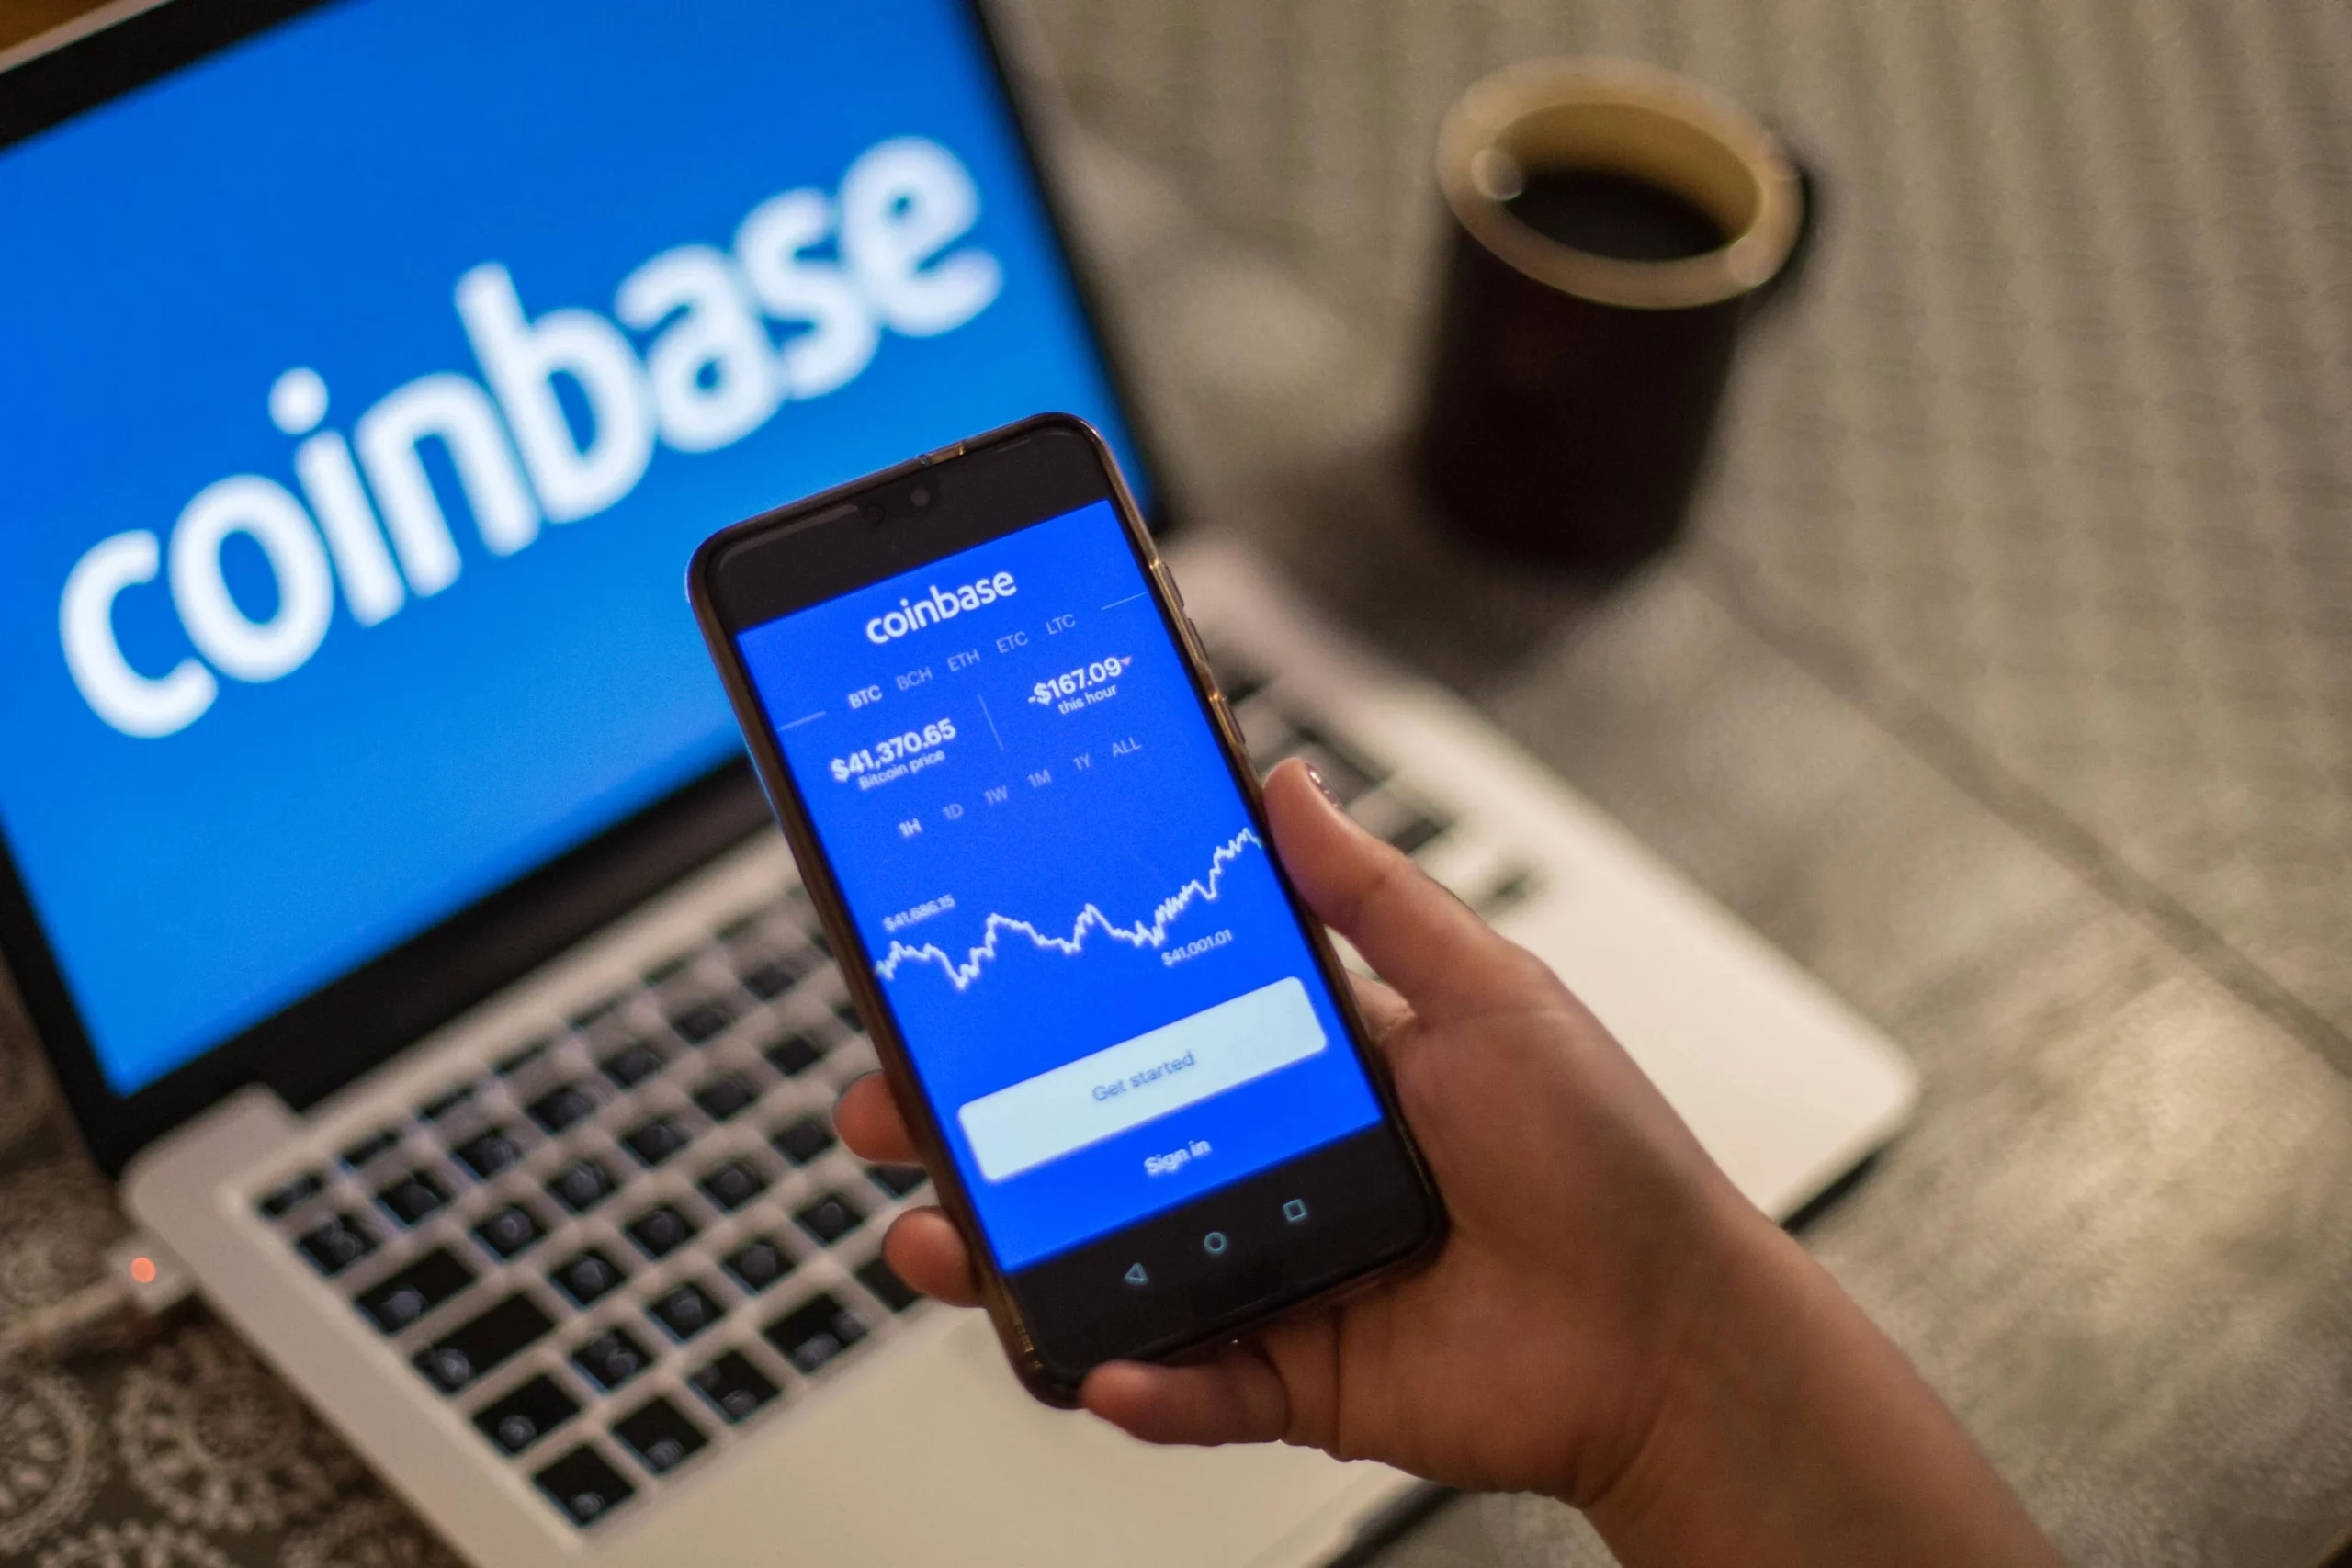 Post-Merge Coinbase To Review Any Potential Ethereum Forks